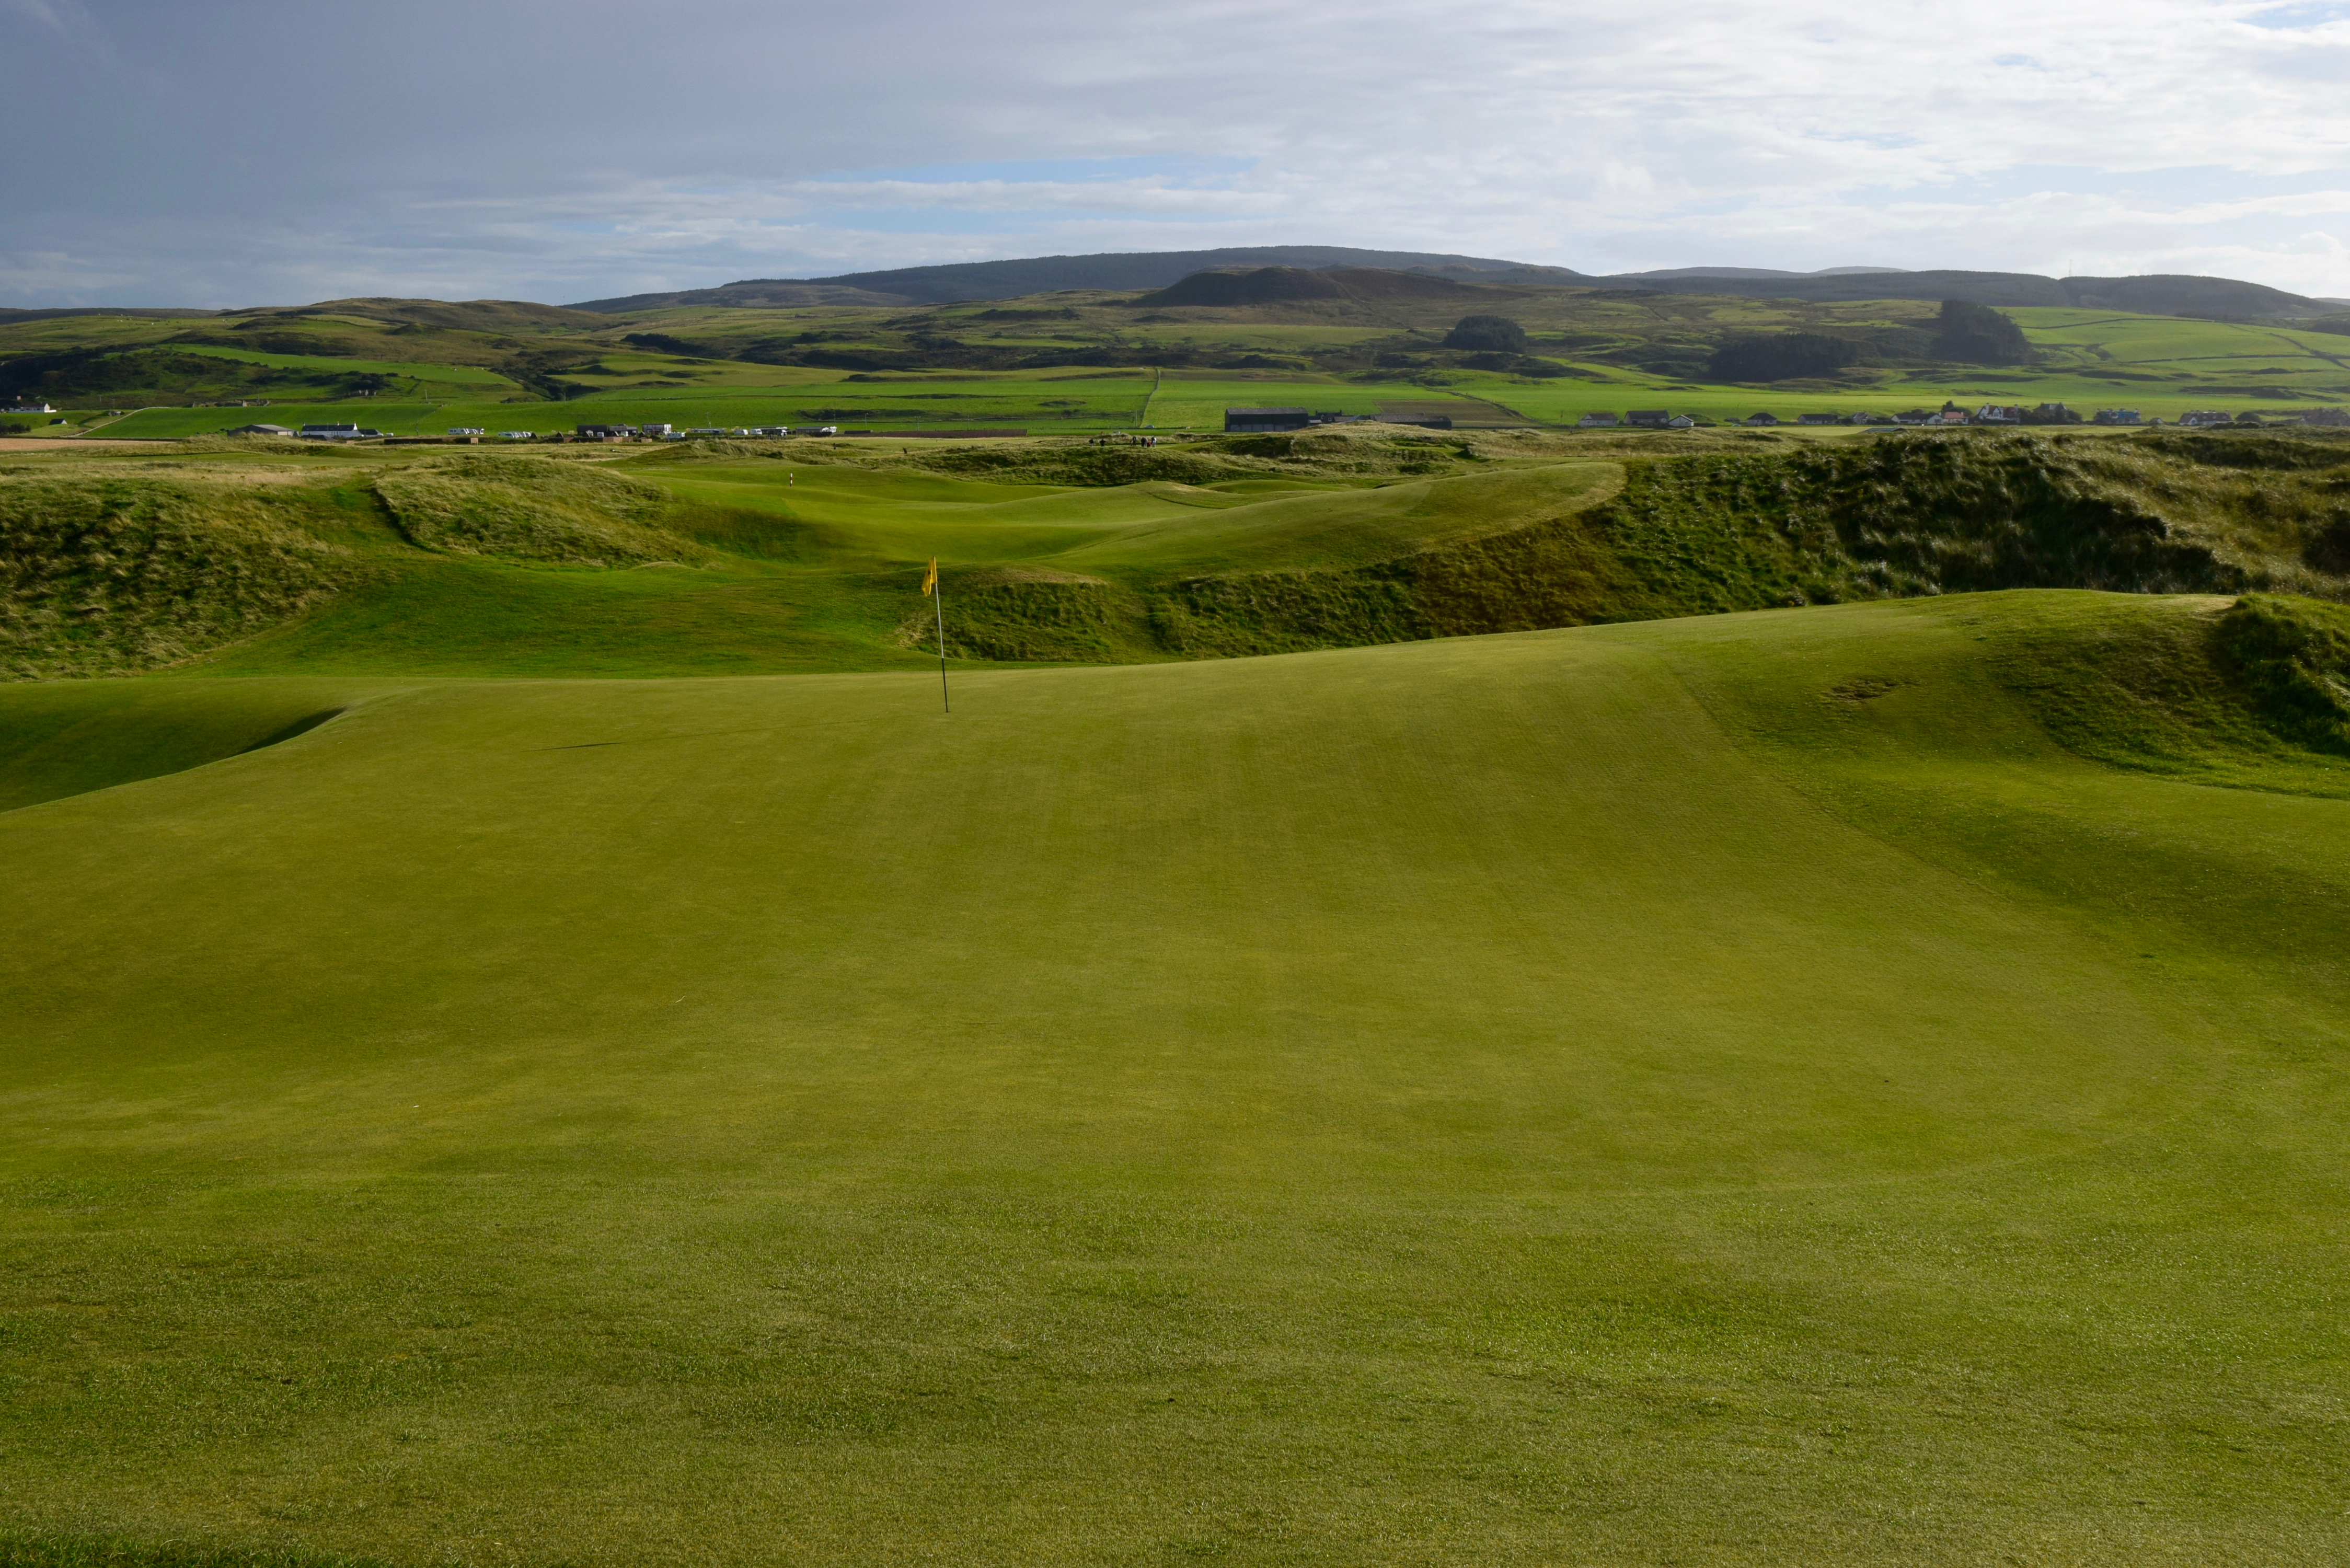 Previewing Scotland: A journey to the birthplace of golf